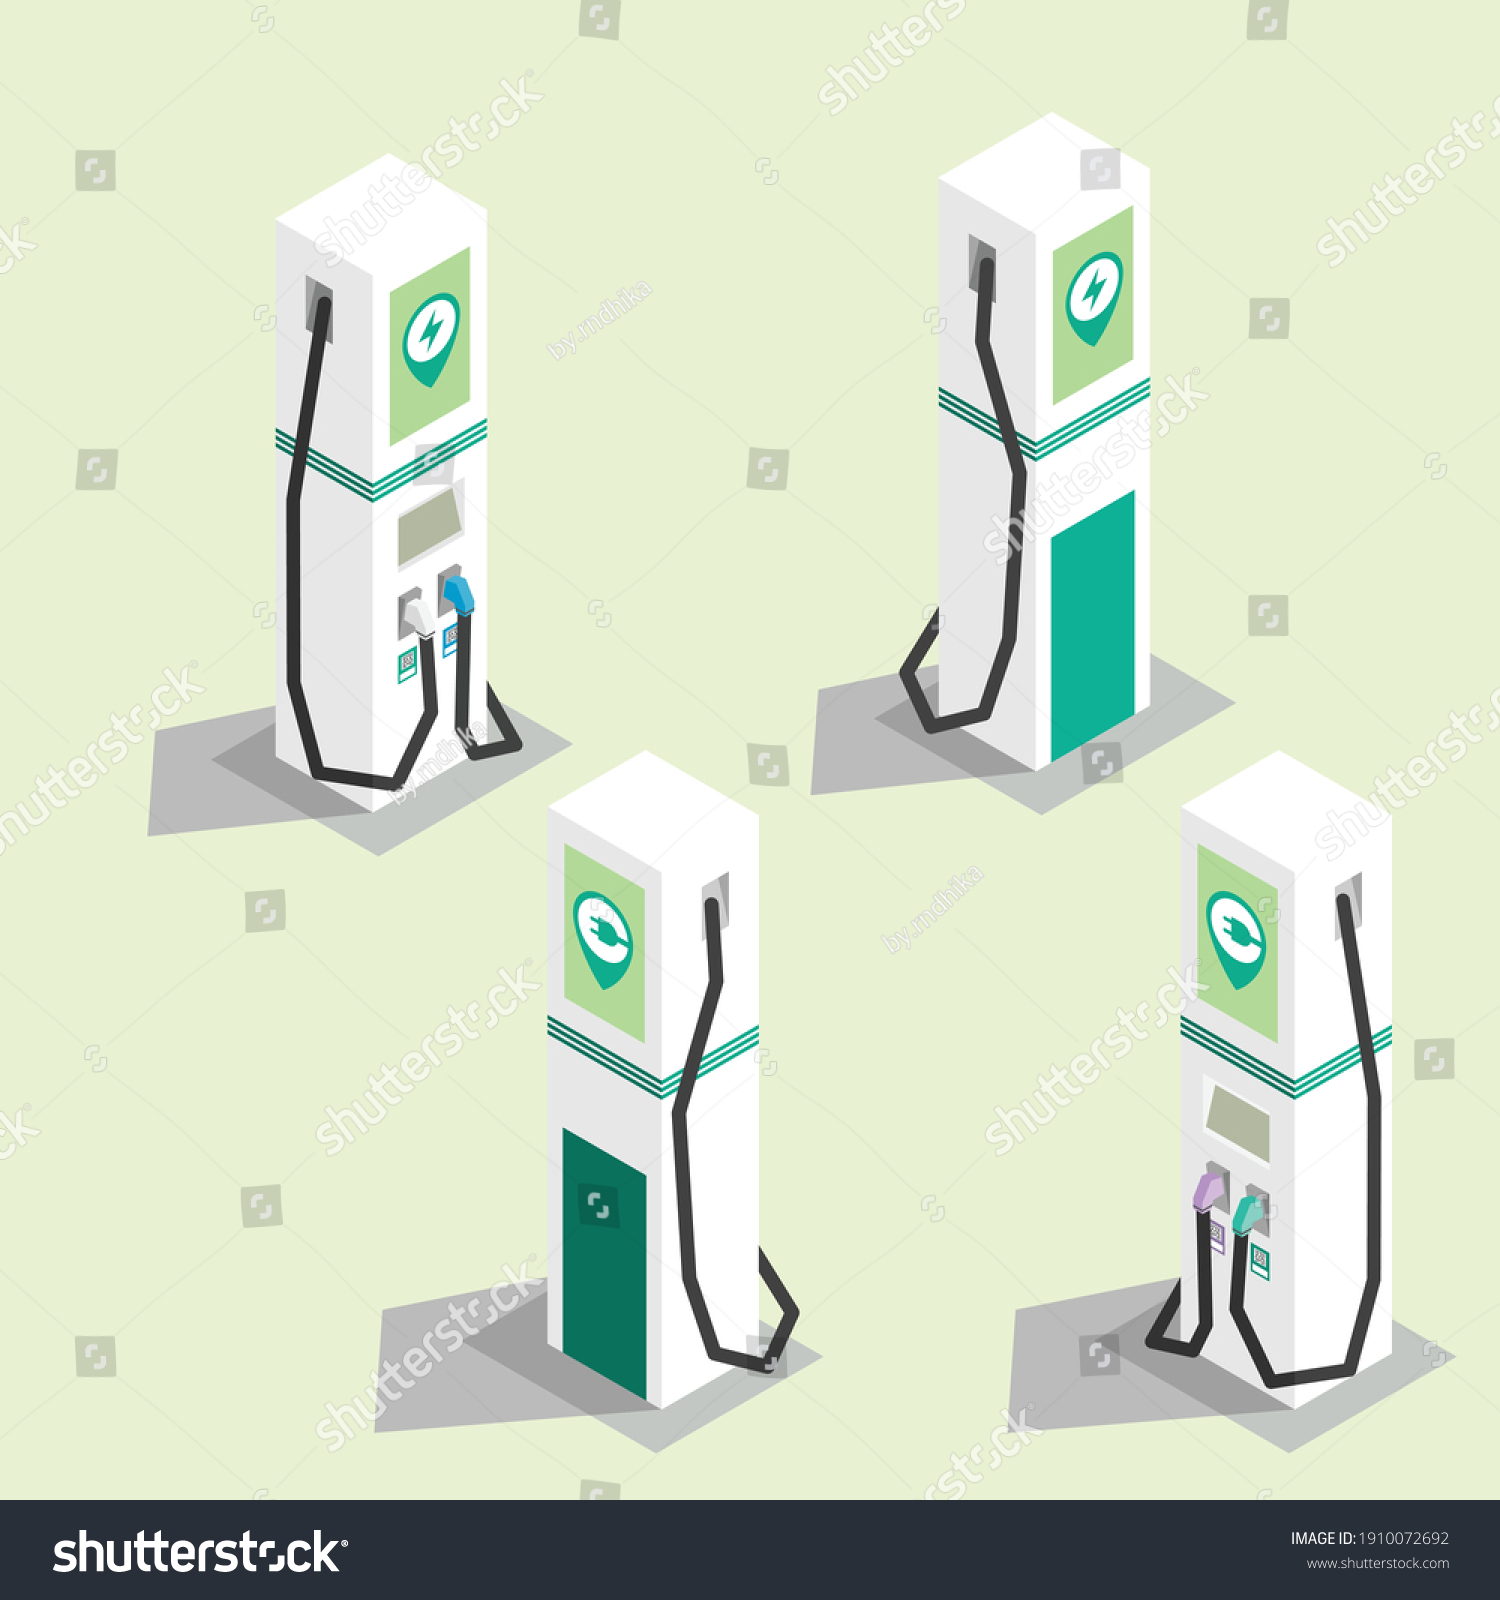 SVG of Isometric drawing of Electric Vehicle Charging Station, Two Point of View with Shadow_Color Sample and Pastel Color Scheme, Flat Cartoon Vector Illustration can be used as Icon, Logo or Avatar svg